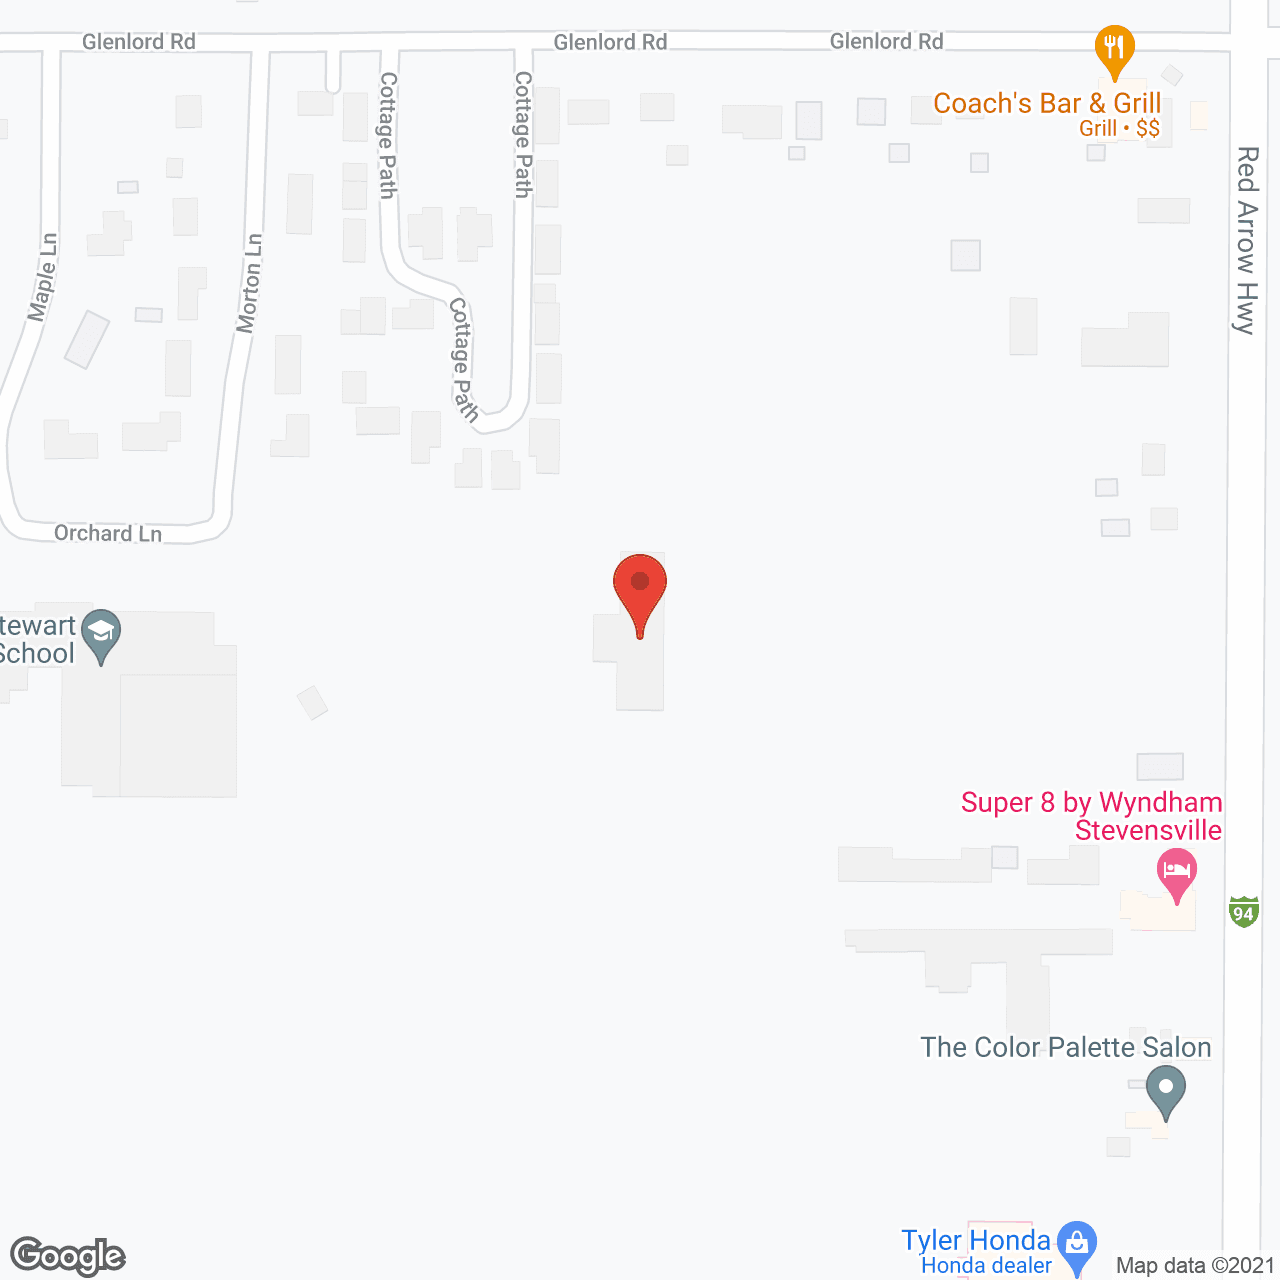 Crown Pointe in google map